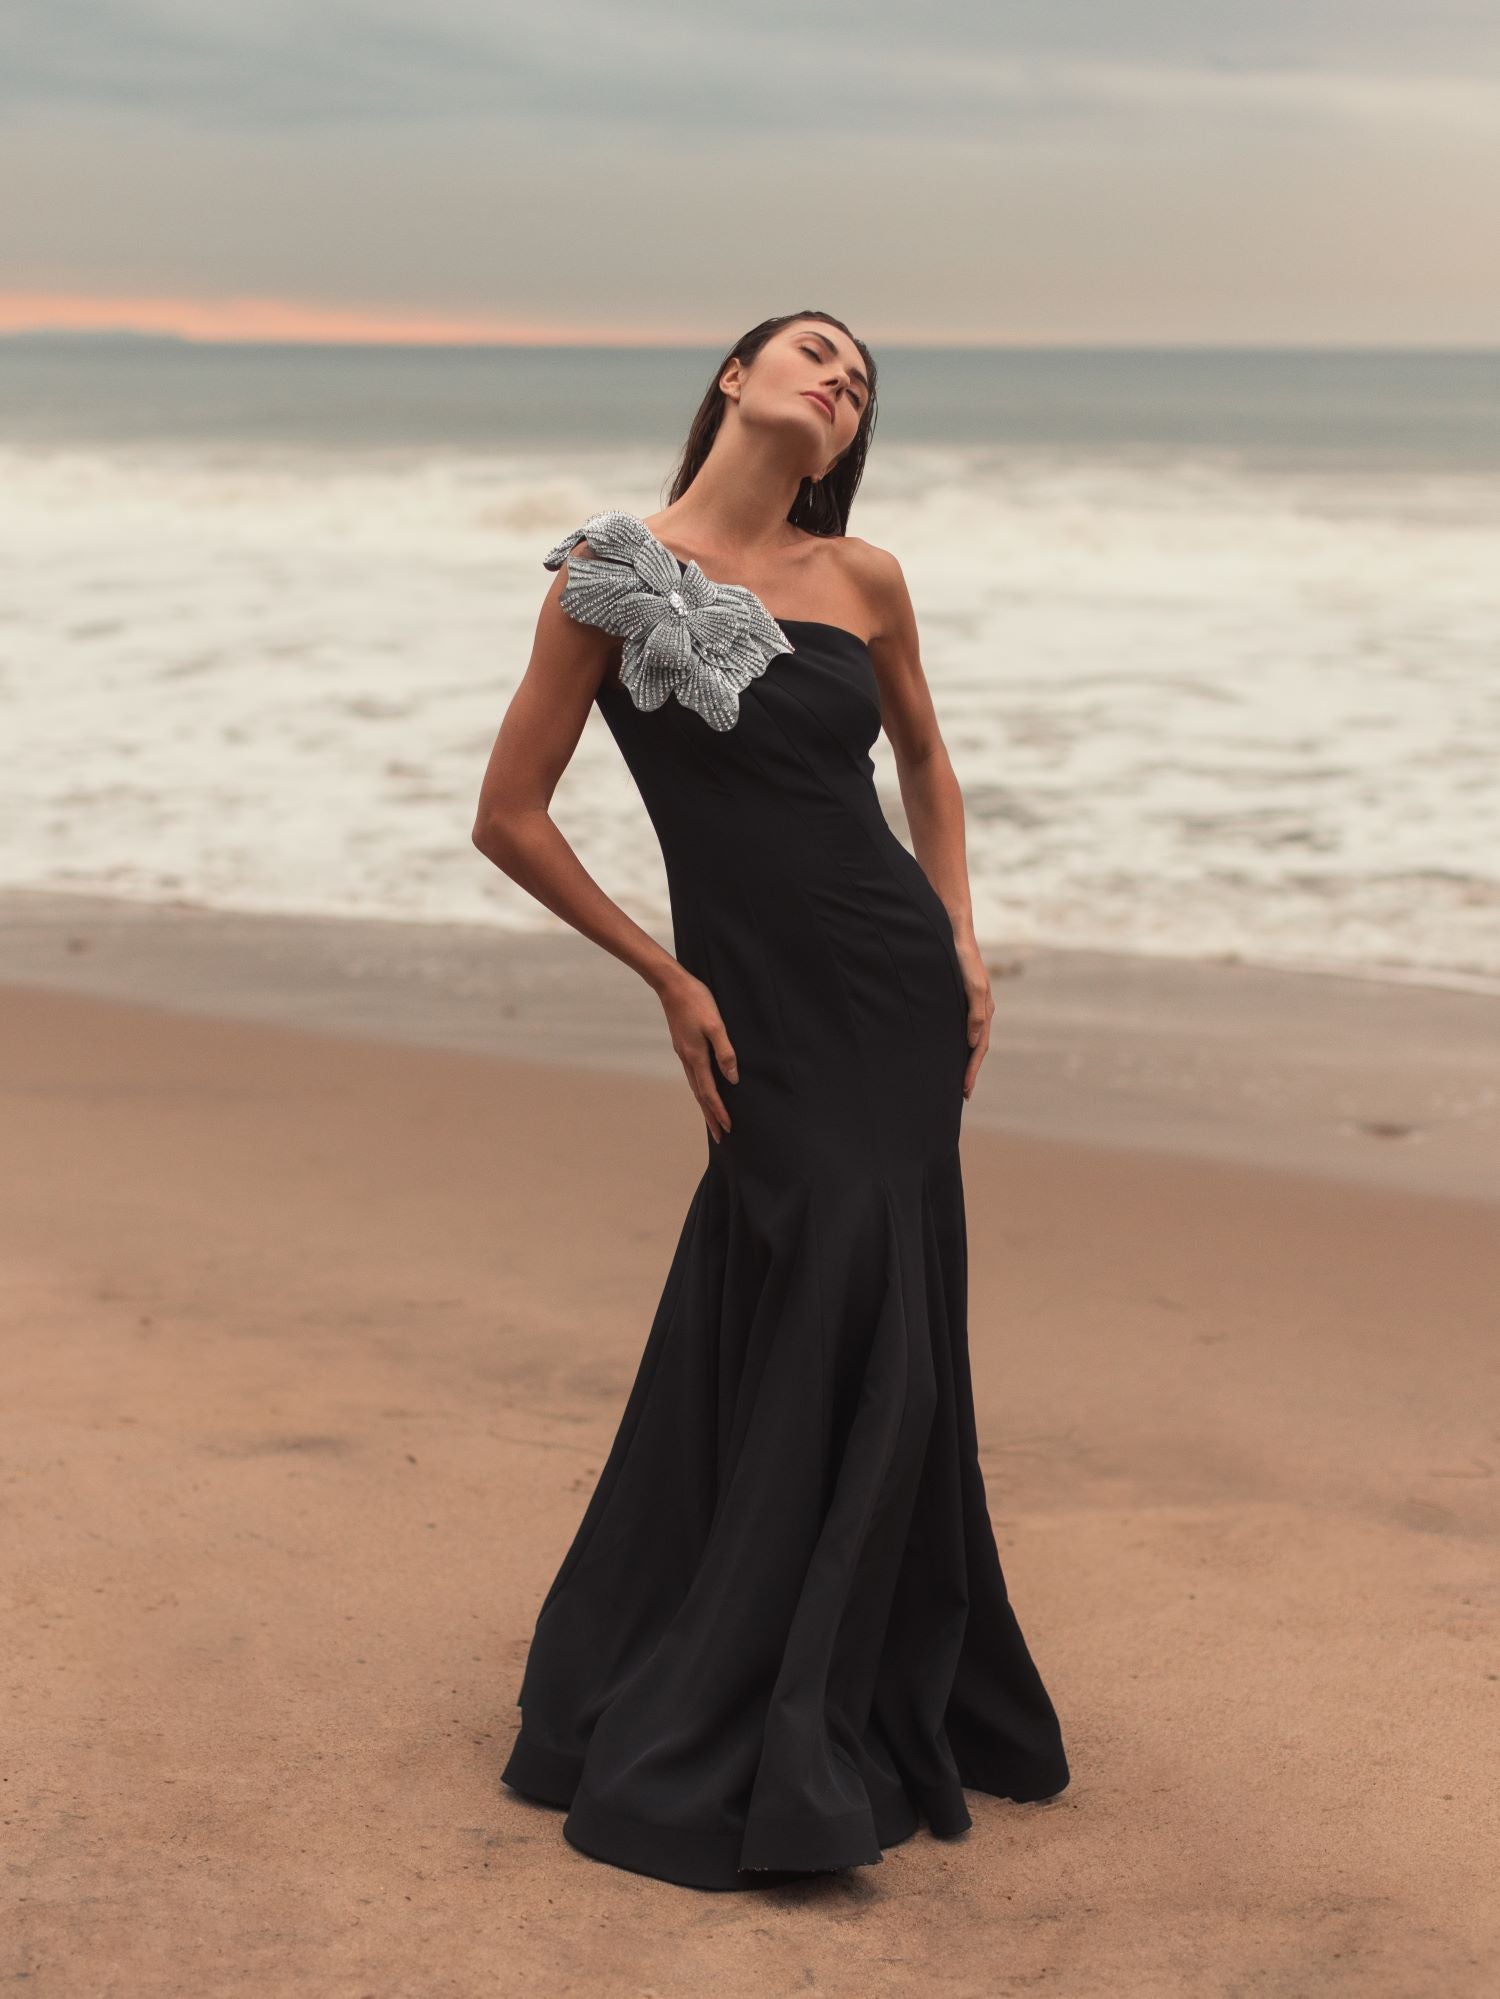 Crepe One Shoulder Gown With Flower